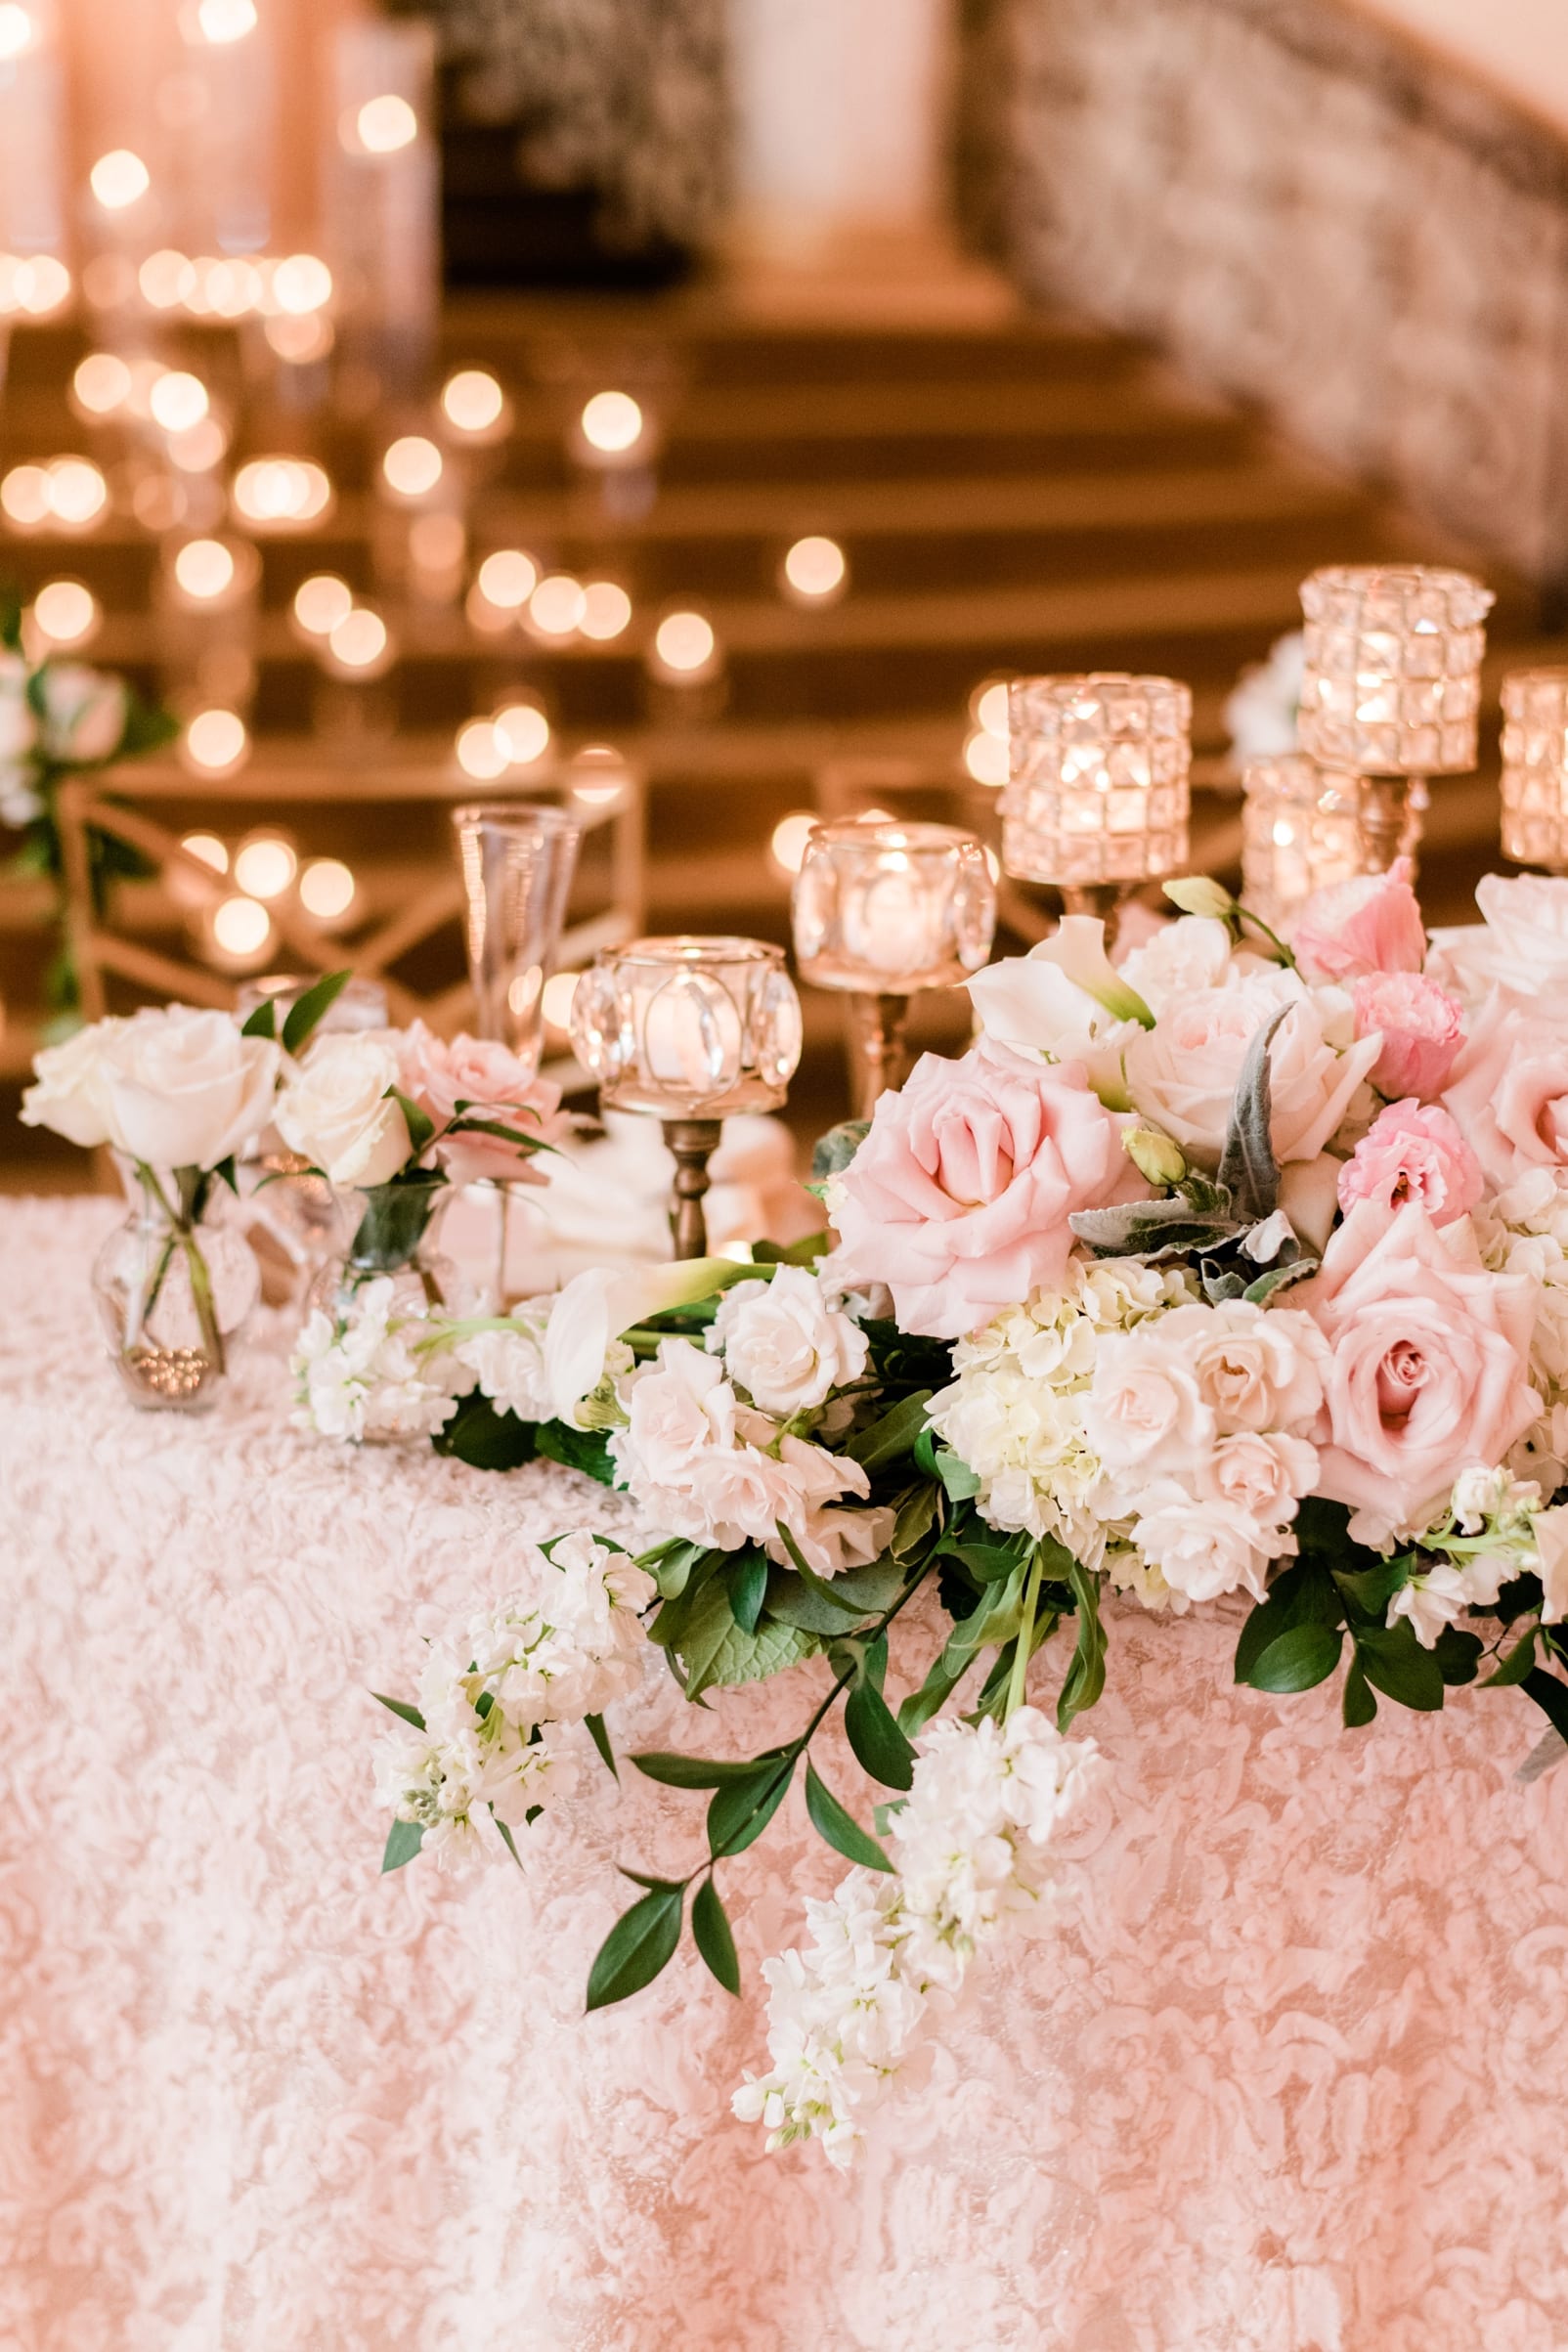 Expressions of Love Florist wedding reception table with flowers cascading across it with candles photo